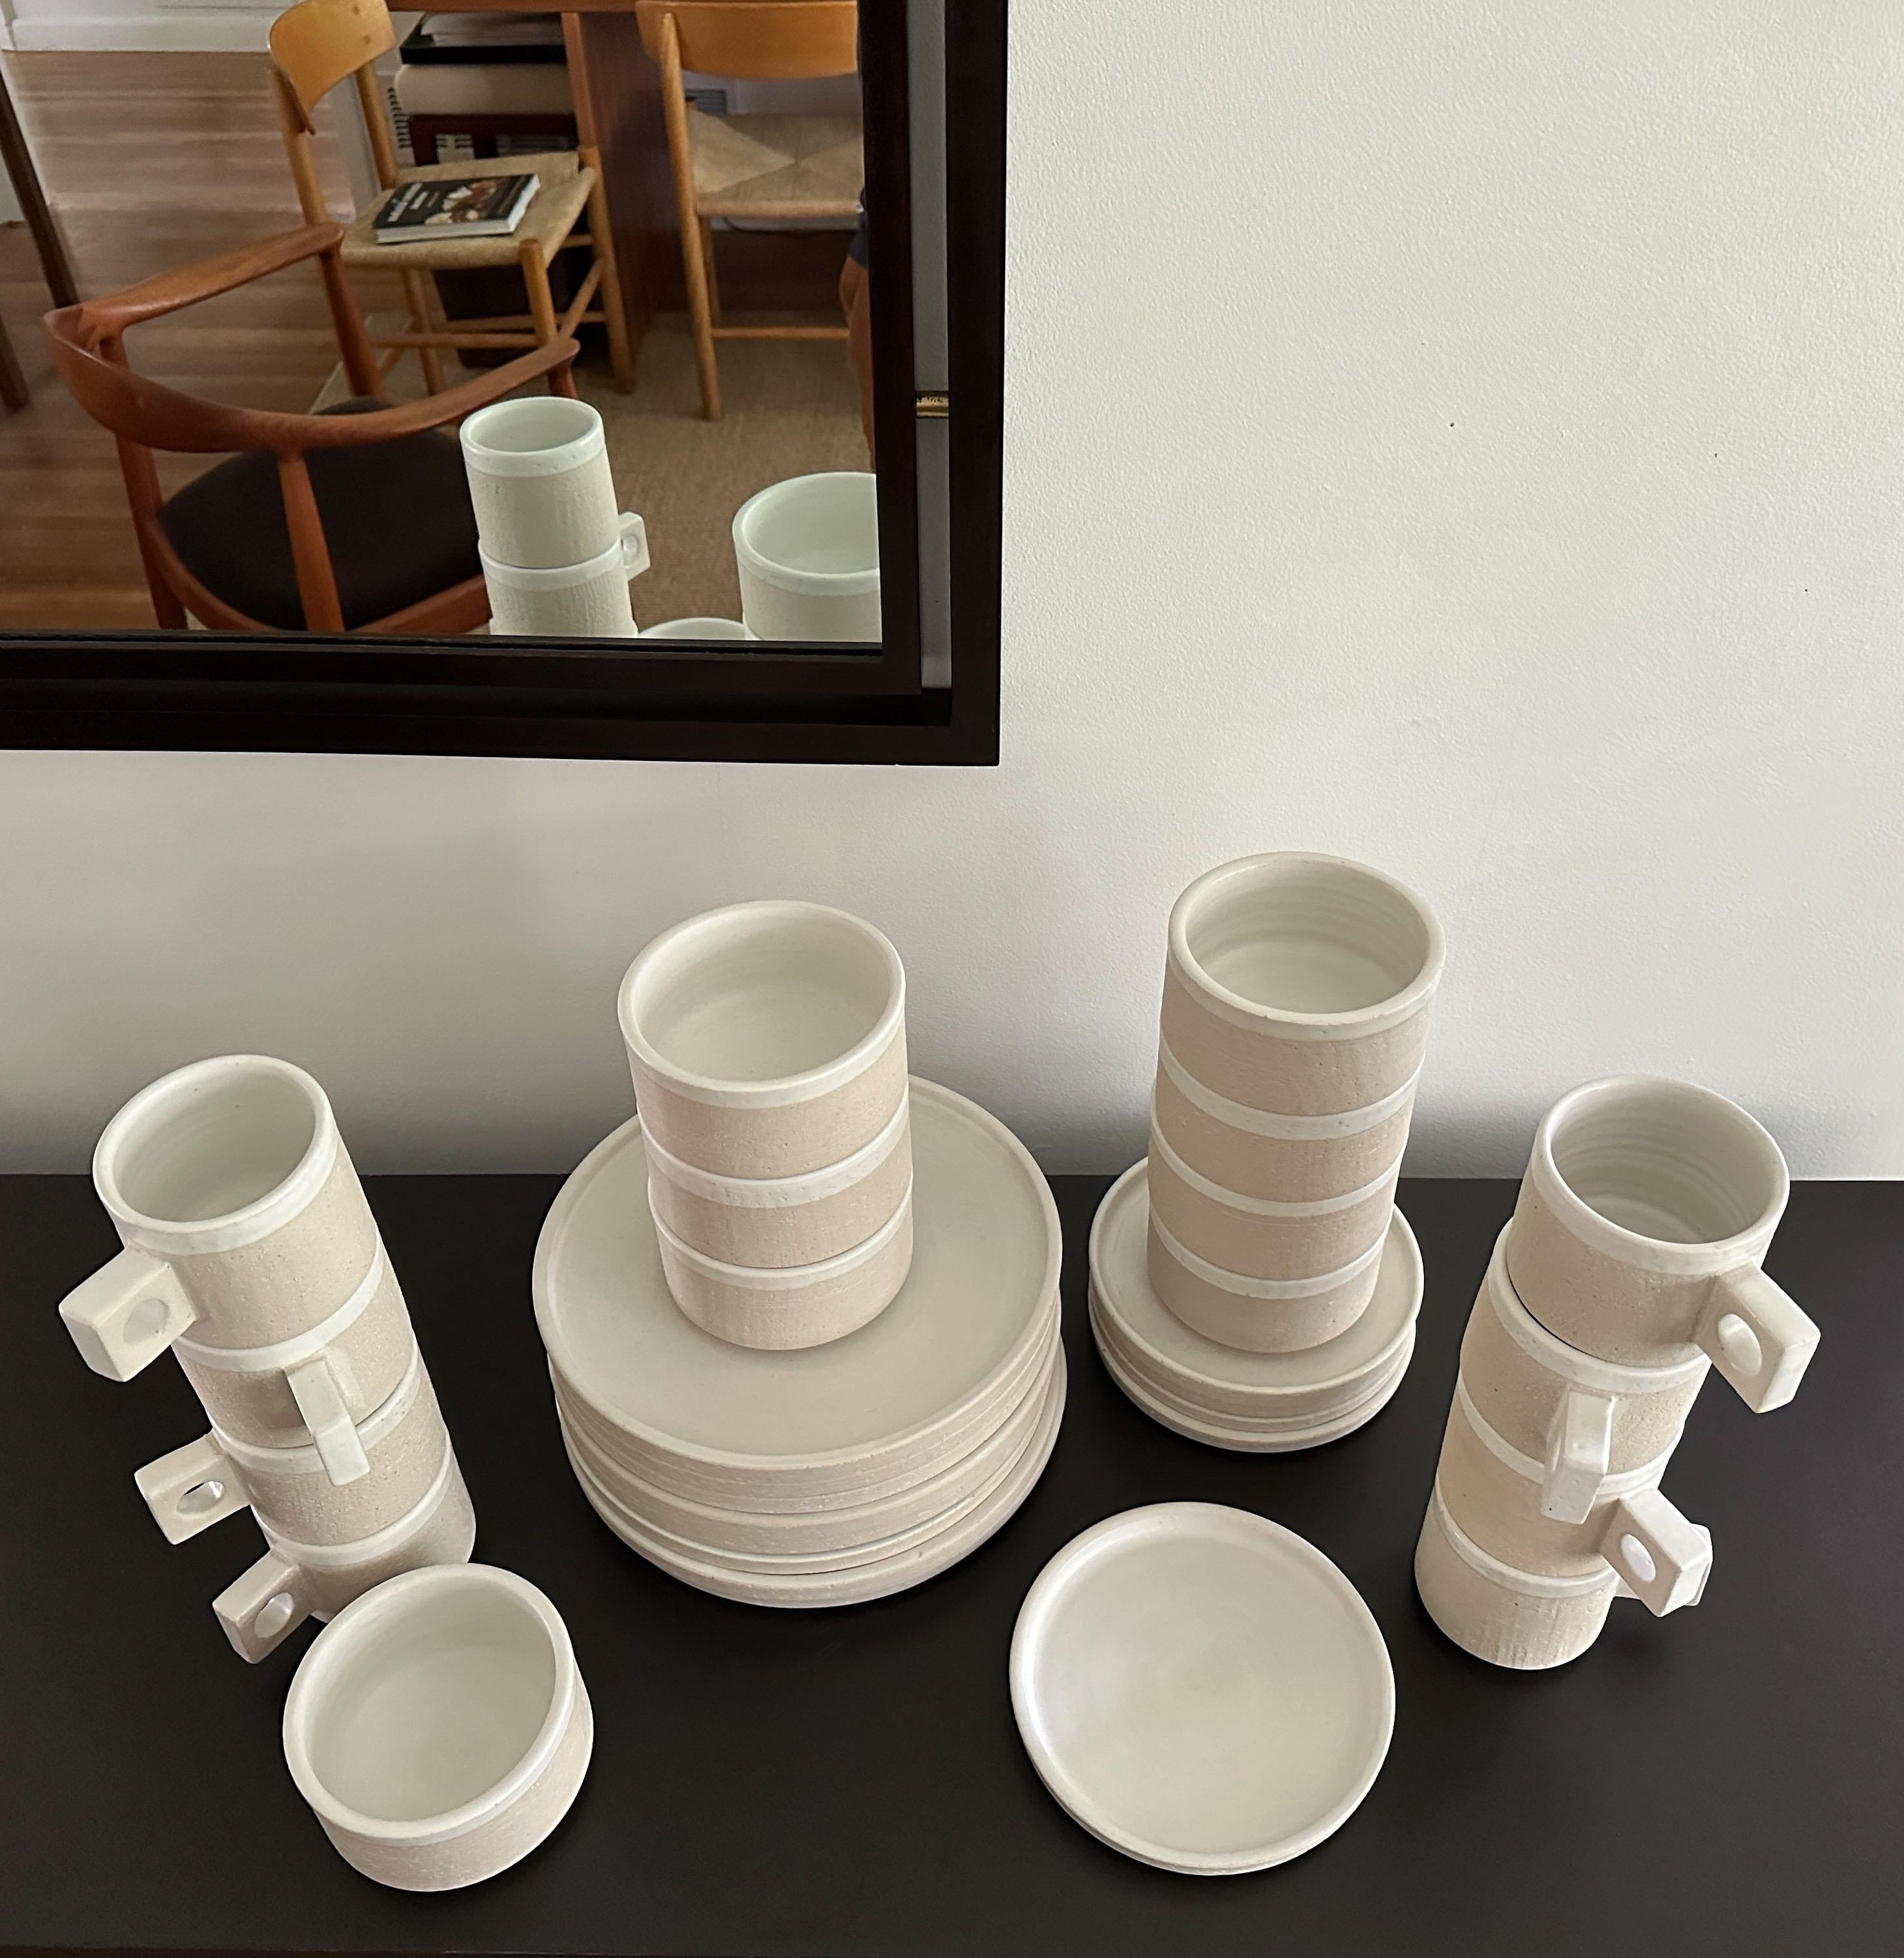 Hand-Crafted 29 Piece Set of Pottery Tableware Designed by Jonathan Adler, Brazilia Pattern For Sale